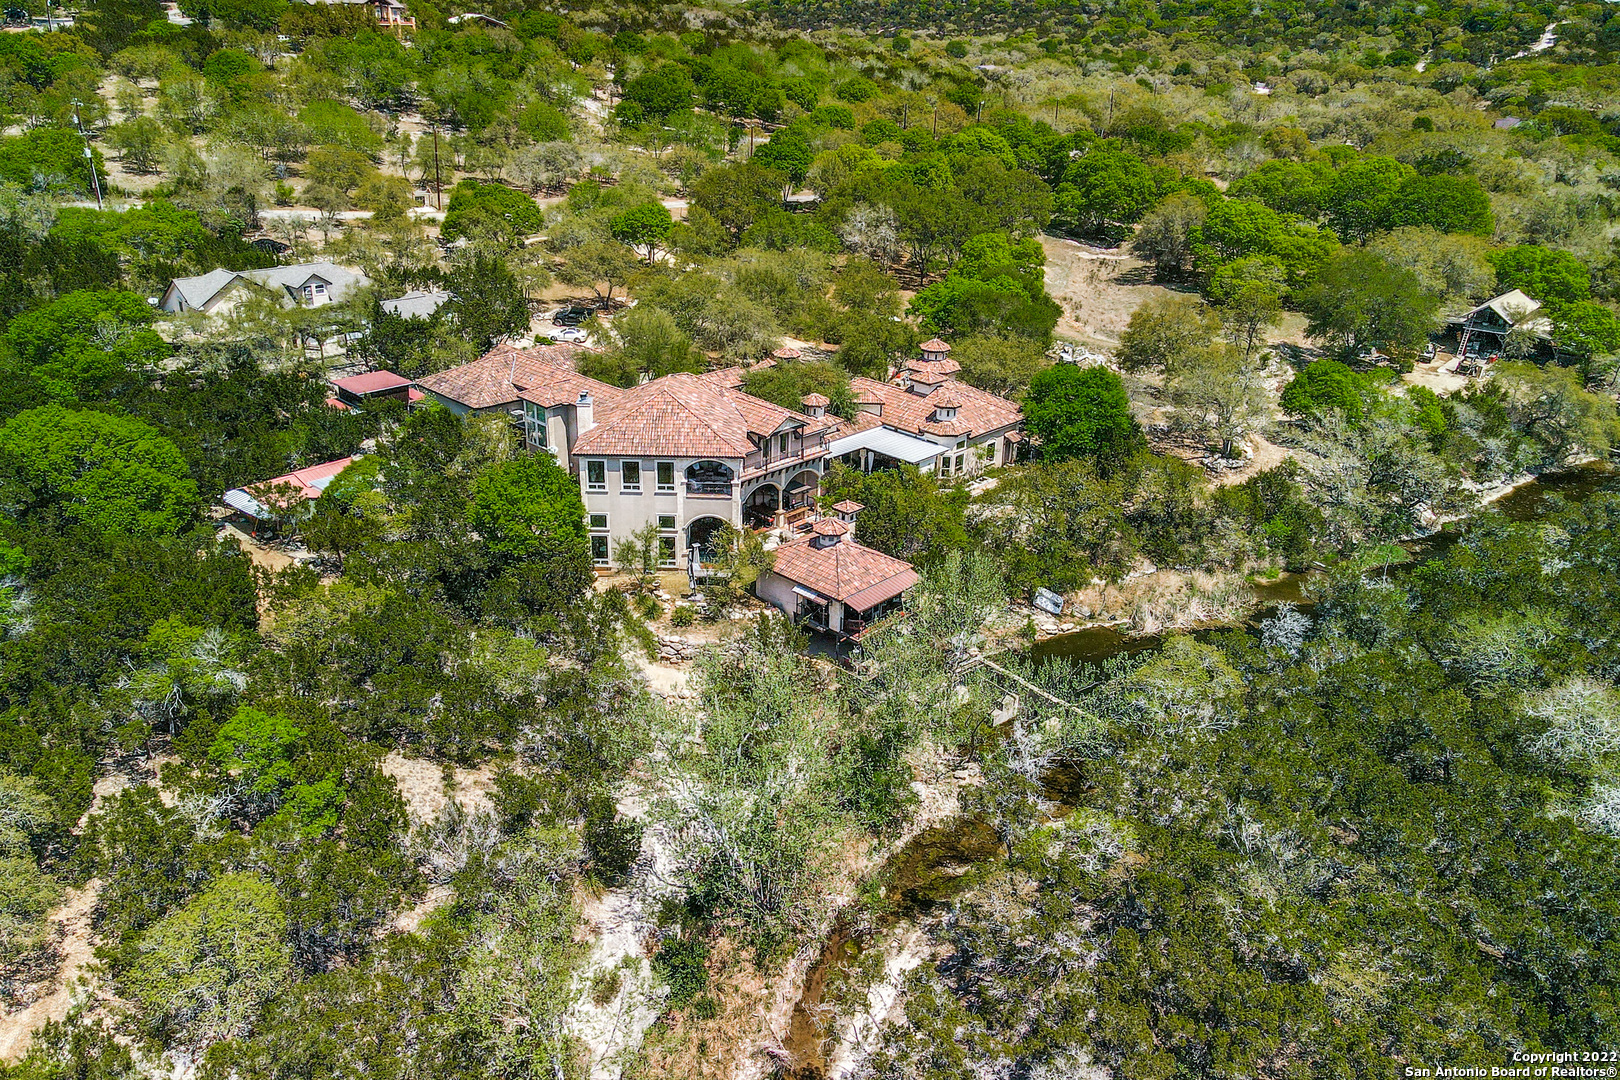 Own a Private Oasis in the Texas Hill Country situated along your very own spring fed, year-round creek! This Magnificent 2-story Mediterranean-style Estate sits on 10 acres of Hill Country in the Heart of Grey Forest with picturesque 360-degree views of the surrounding hills and total privacy in your backyard Hill Country paradise is only 30 min to the San Antonio International Airport and 2 hours to Austin. Enjoy the convenience of being close to 1604, I-10, and all of the shopping at The Rim & La Cantera. The open concept layout offers natural light showcasing a neutral color palette, crown molding, arched entryways, high level finishes such as alabaster, hand scraped wood and travertine floors, marble statues throughout and floor to ceiling stone fireplaces. Plenty of room for outdoor entertaining with large front & back patios, a cabana and two outdoor kitchens overlooking the water. The chef's kitchen is equipped with custom maple wood cabinetry, quartz countertops, a spacious walk-in pantry along with a Butler's pantry. The main-level master suite features tray ceilings with a sitting area overlooking the creek and private patio access. You are greeted by a grandiose statue in the master bathroom and the spaciousness of a dual vanity, an oversized marble garden tub with a fireplace and a beautiful curved walk-in shower. Upstairs, each bedroom has its own private balcony overlooking the creek and a media room perfect for game night or your own private theater. The Main House also featured a 4-car garage with separate stairway to the second floor.  In addition to the Main House, you will enjoy 2 separate Guest Homes on the property as well as an Equipment Barn and three-level deck overlooking the creek and dam. Owner financing available!